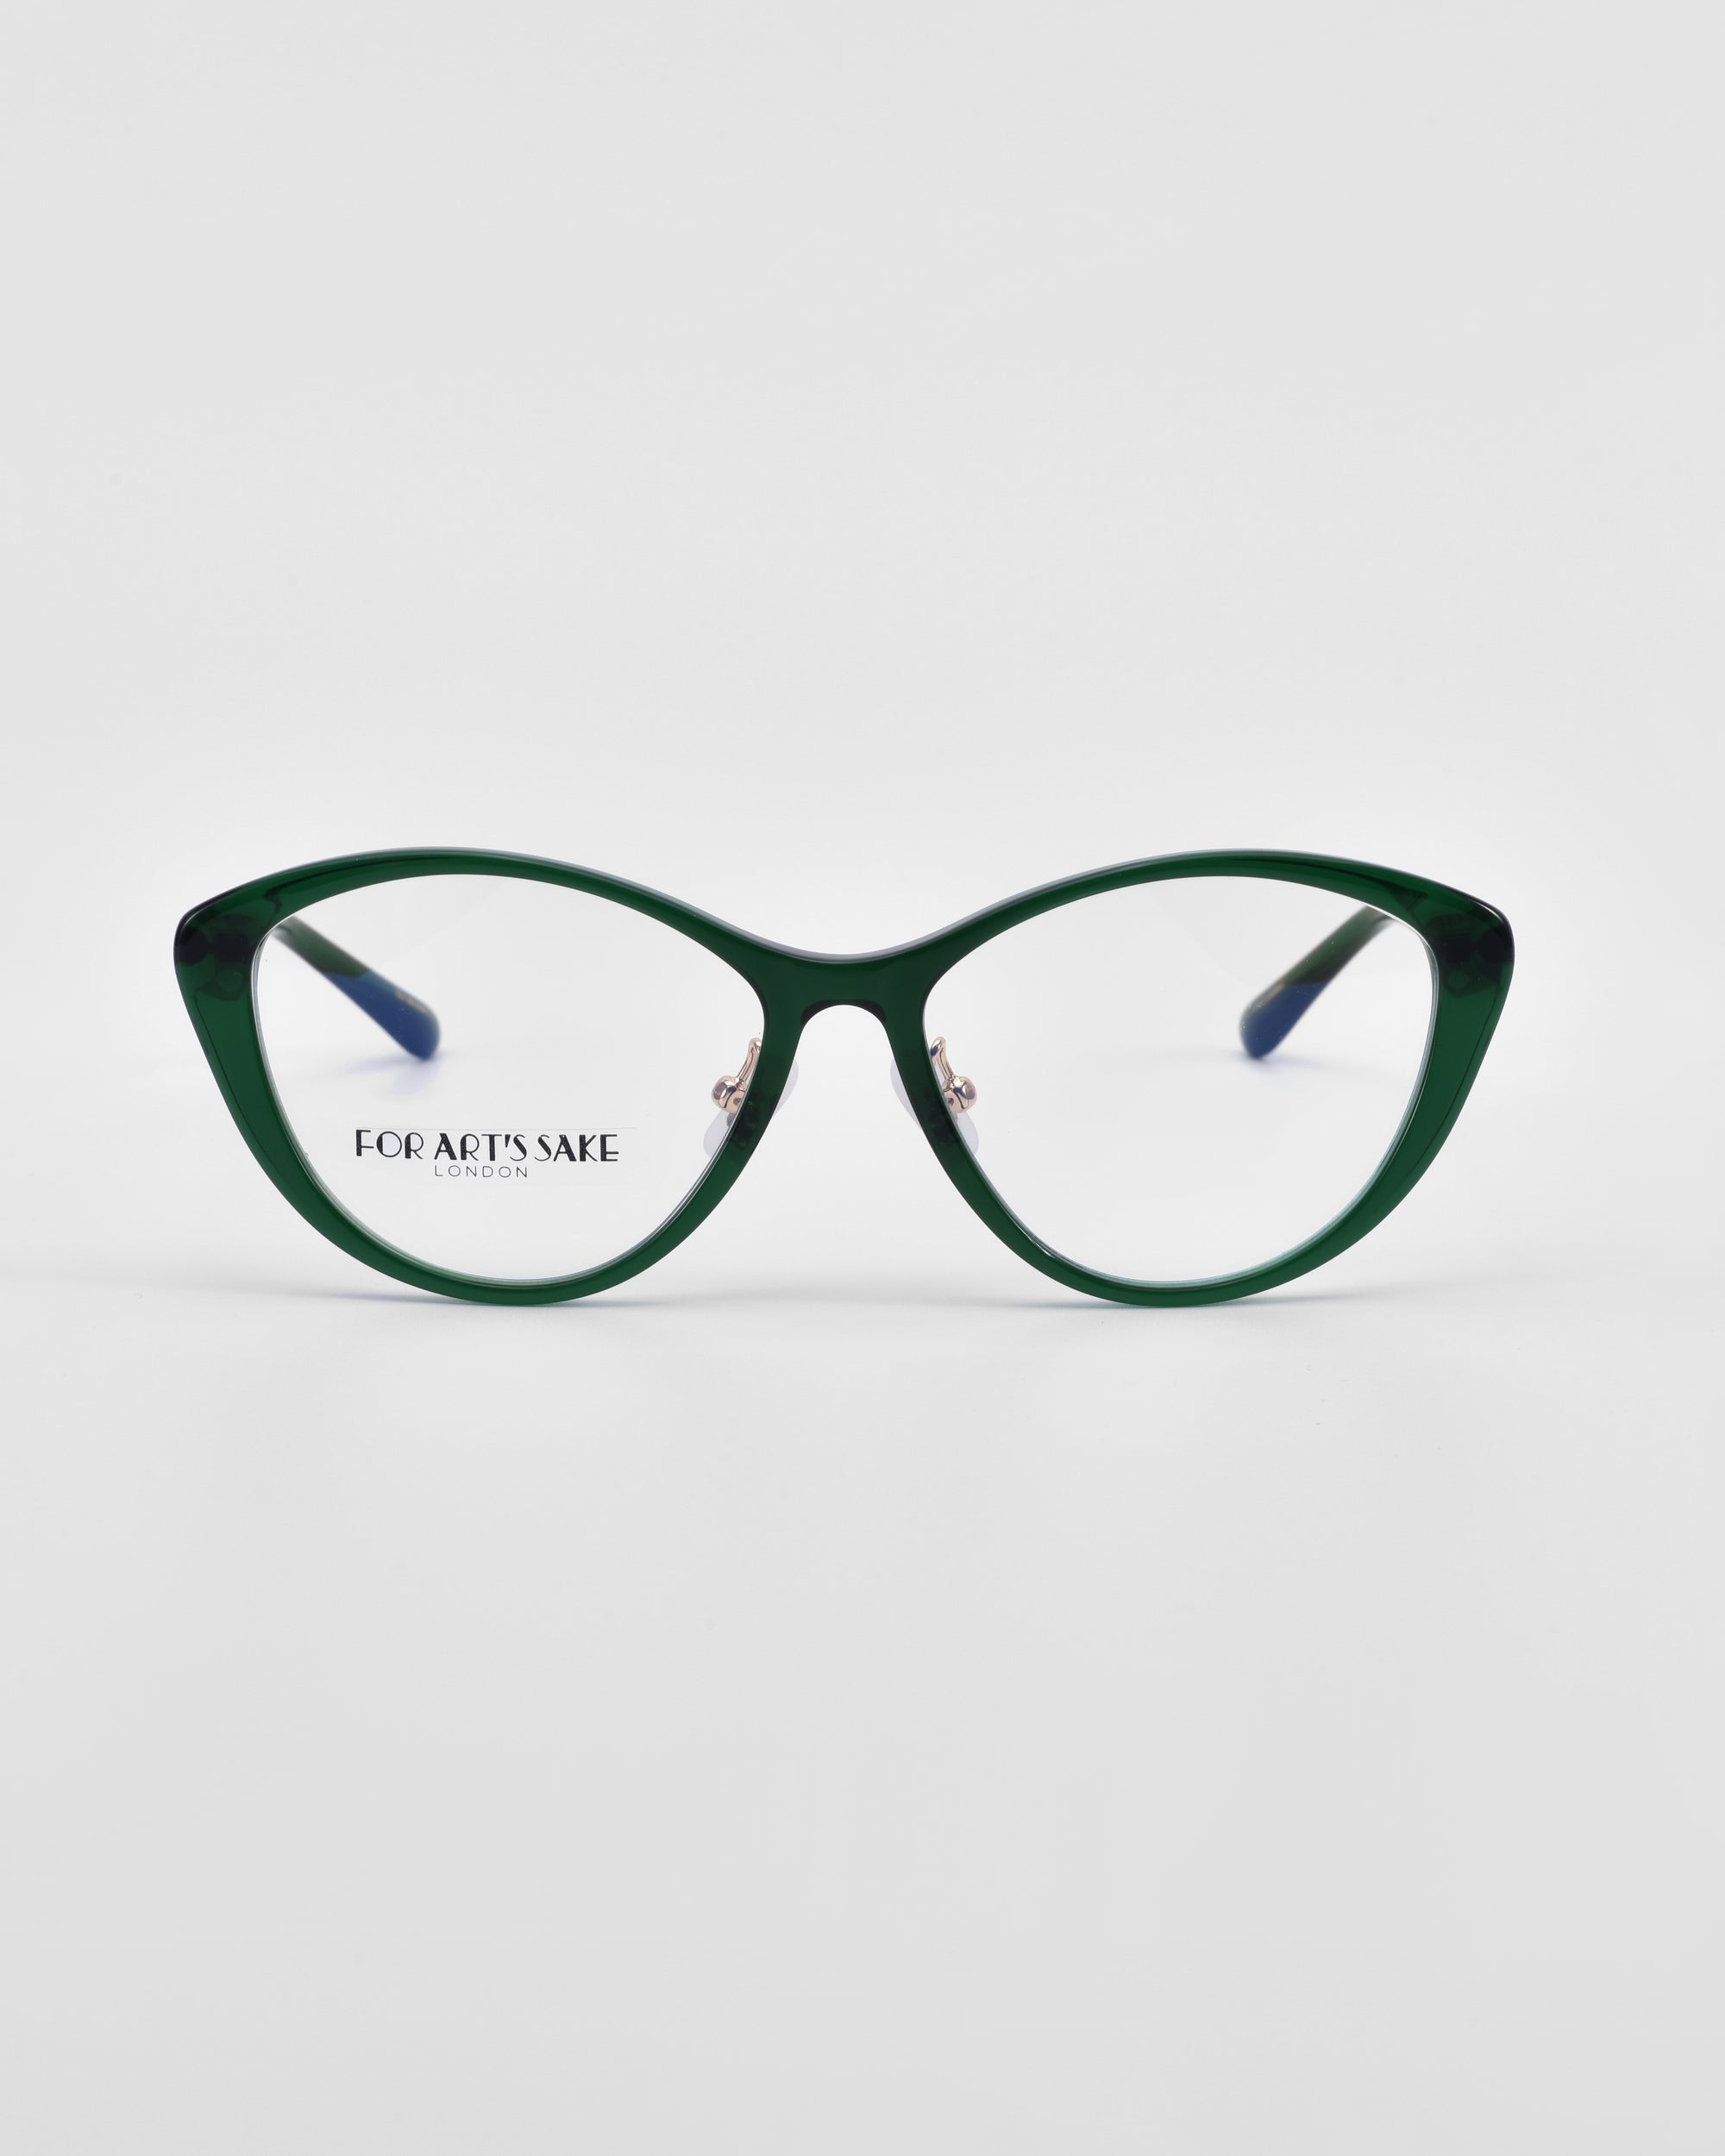 A pair of stylish green cat-eye eyeglasses with blue temples and jade-stone nose pads. The lenses are clear, and the words &quot;For Art&#39;s Sake®&quot; are printed on the left lens. These Perla II eyeglasses boast an optical design finesse and are set against a plain white background.